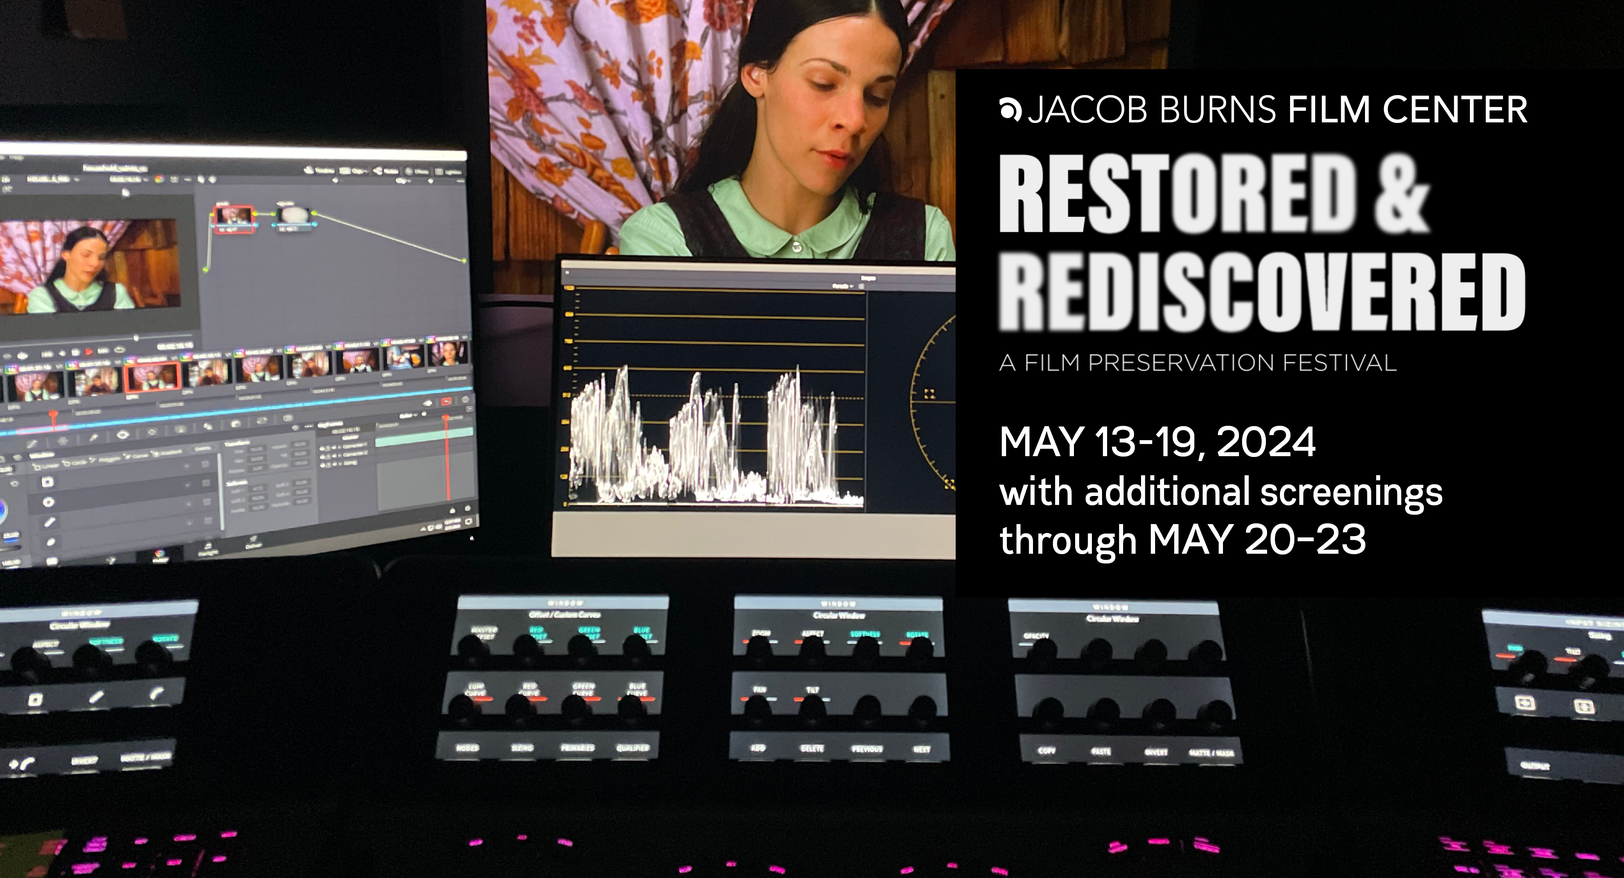 JBFC ANNOUNCES RESTORED & REDISCOVERED: A FILM PRESERVATION FESTIVAL ON MAY 13-23, 2024